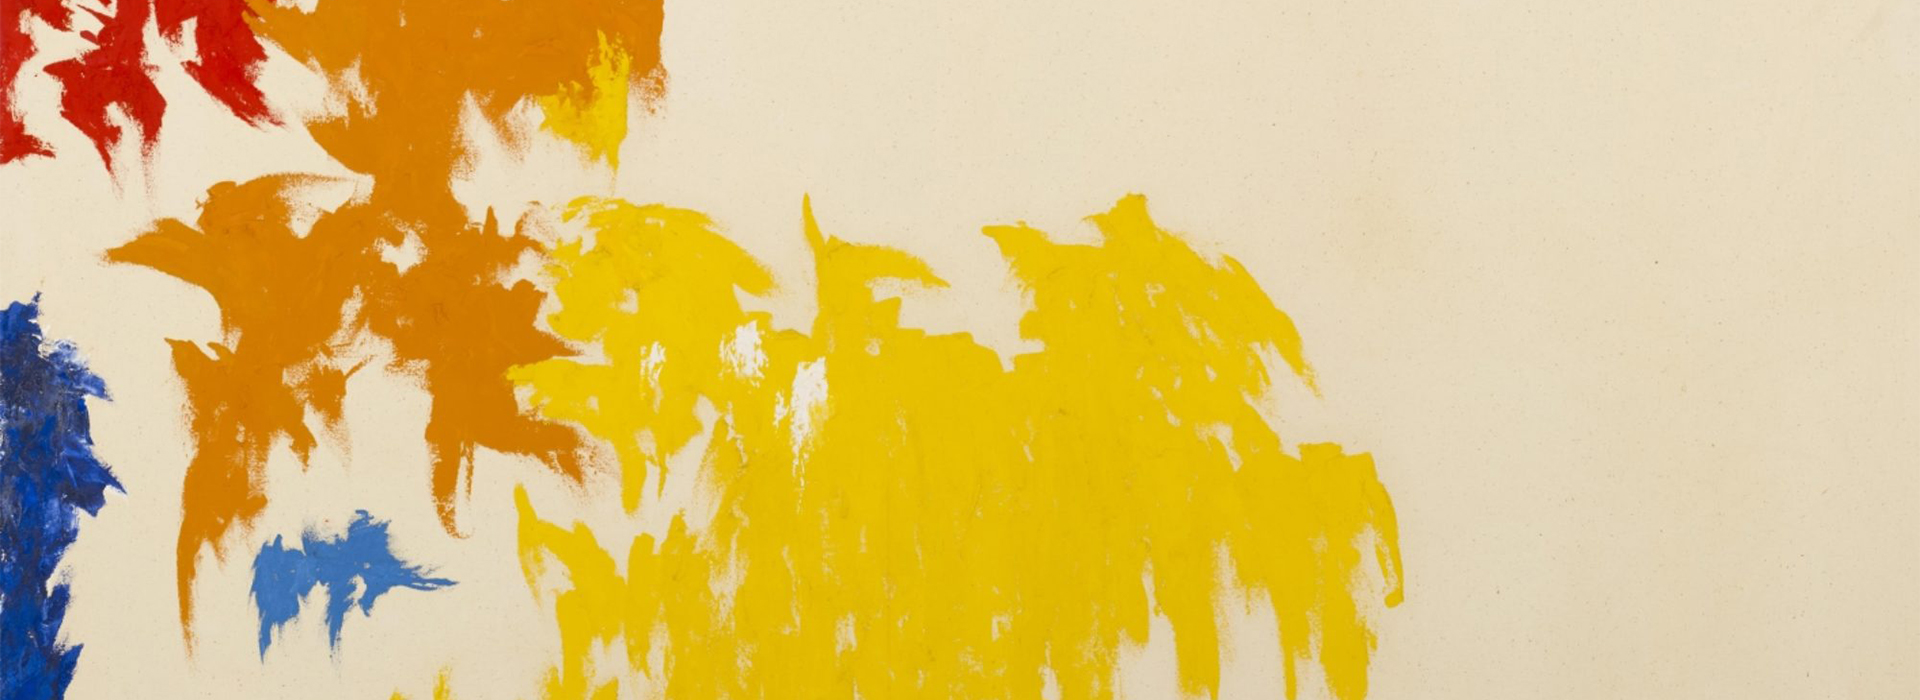 Detailed image of a colorful abstract painting by Clyfford Still with yellow, orange, red, light blue, and dark blue paint and bare canvas